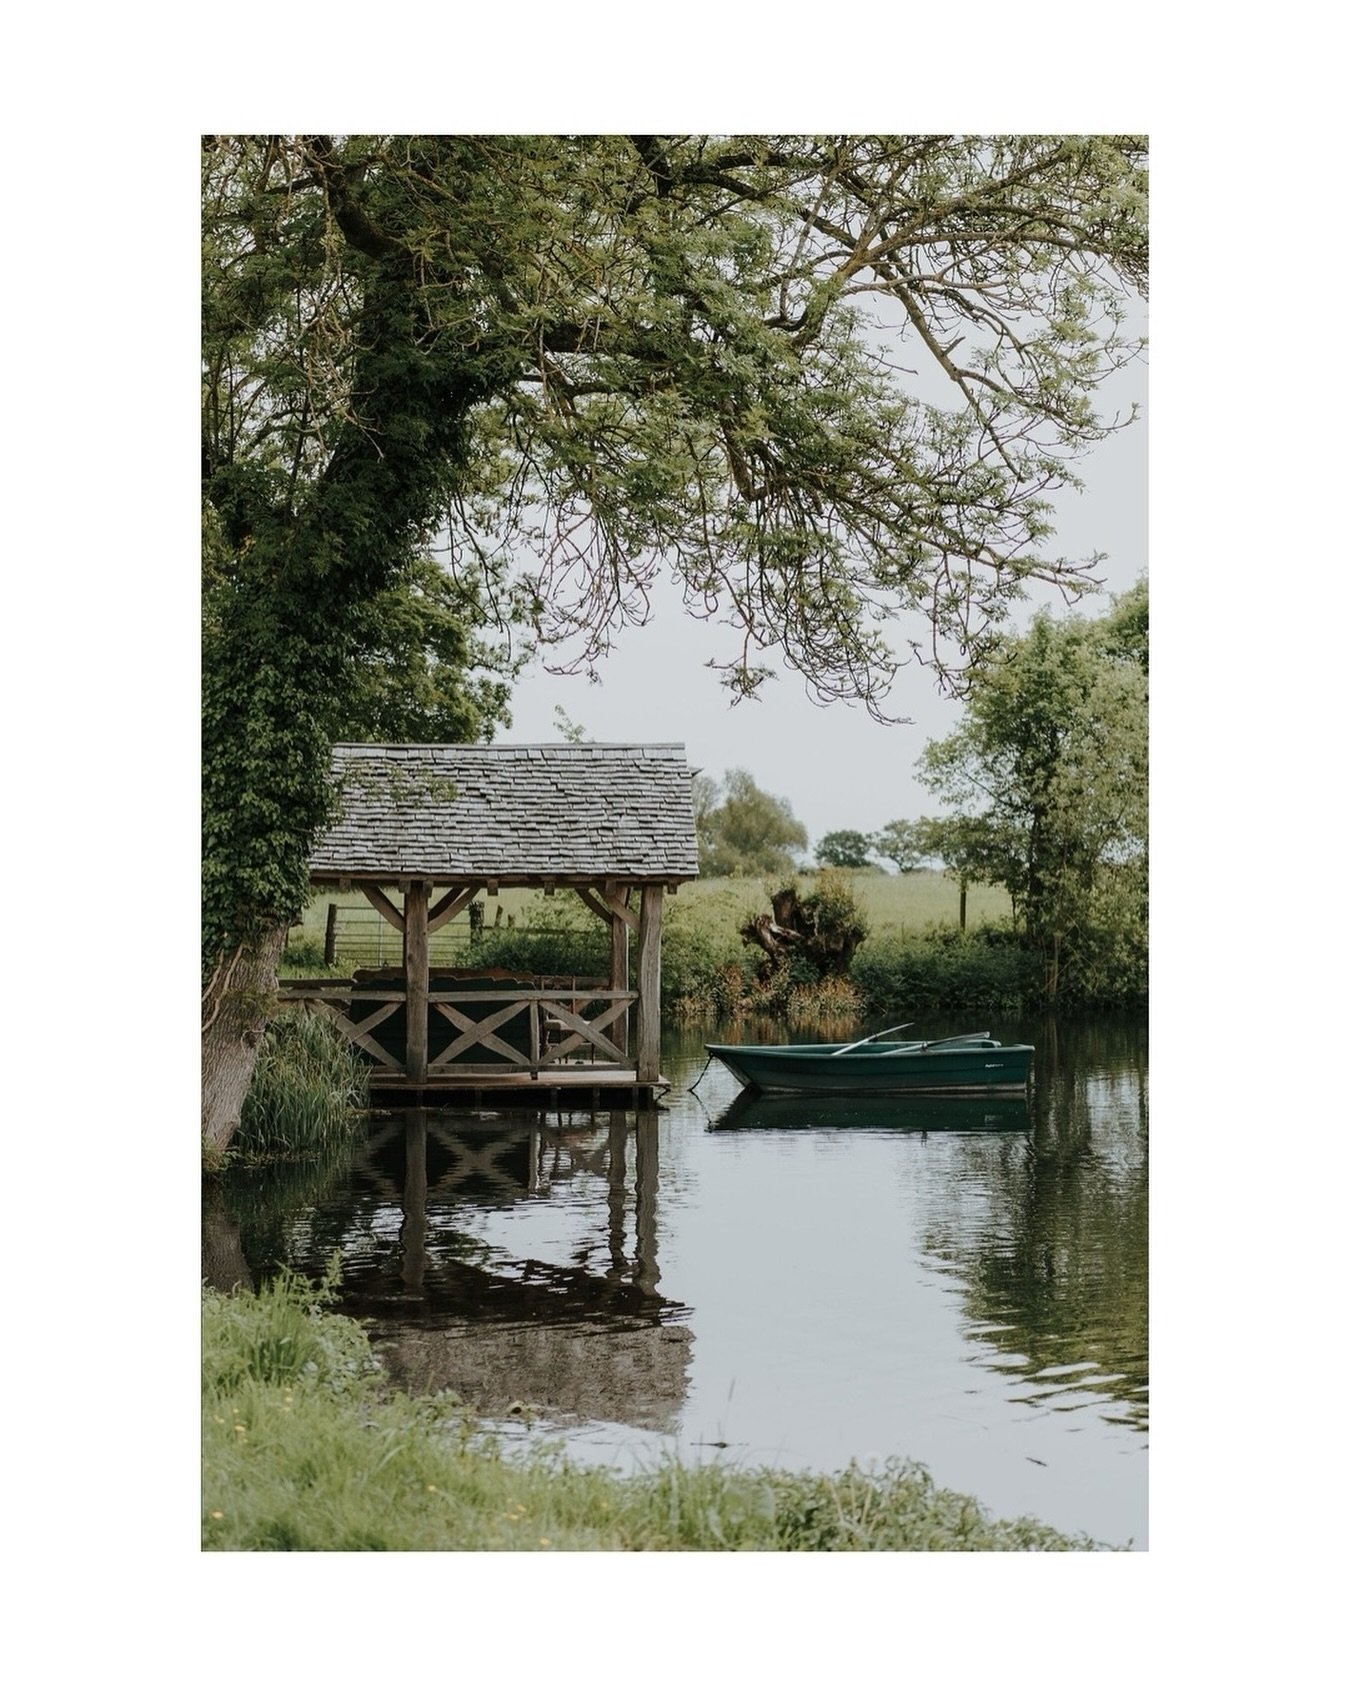 As we head into the weekend I wish you rest and relaxation, perhaps somewhere as tranquil as this lake&hellip;

Shot for @fablefaine 

#weekendvibes #fablefaine #lakeside #boathouse #shootlocation